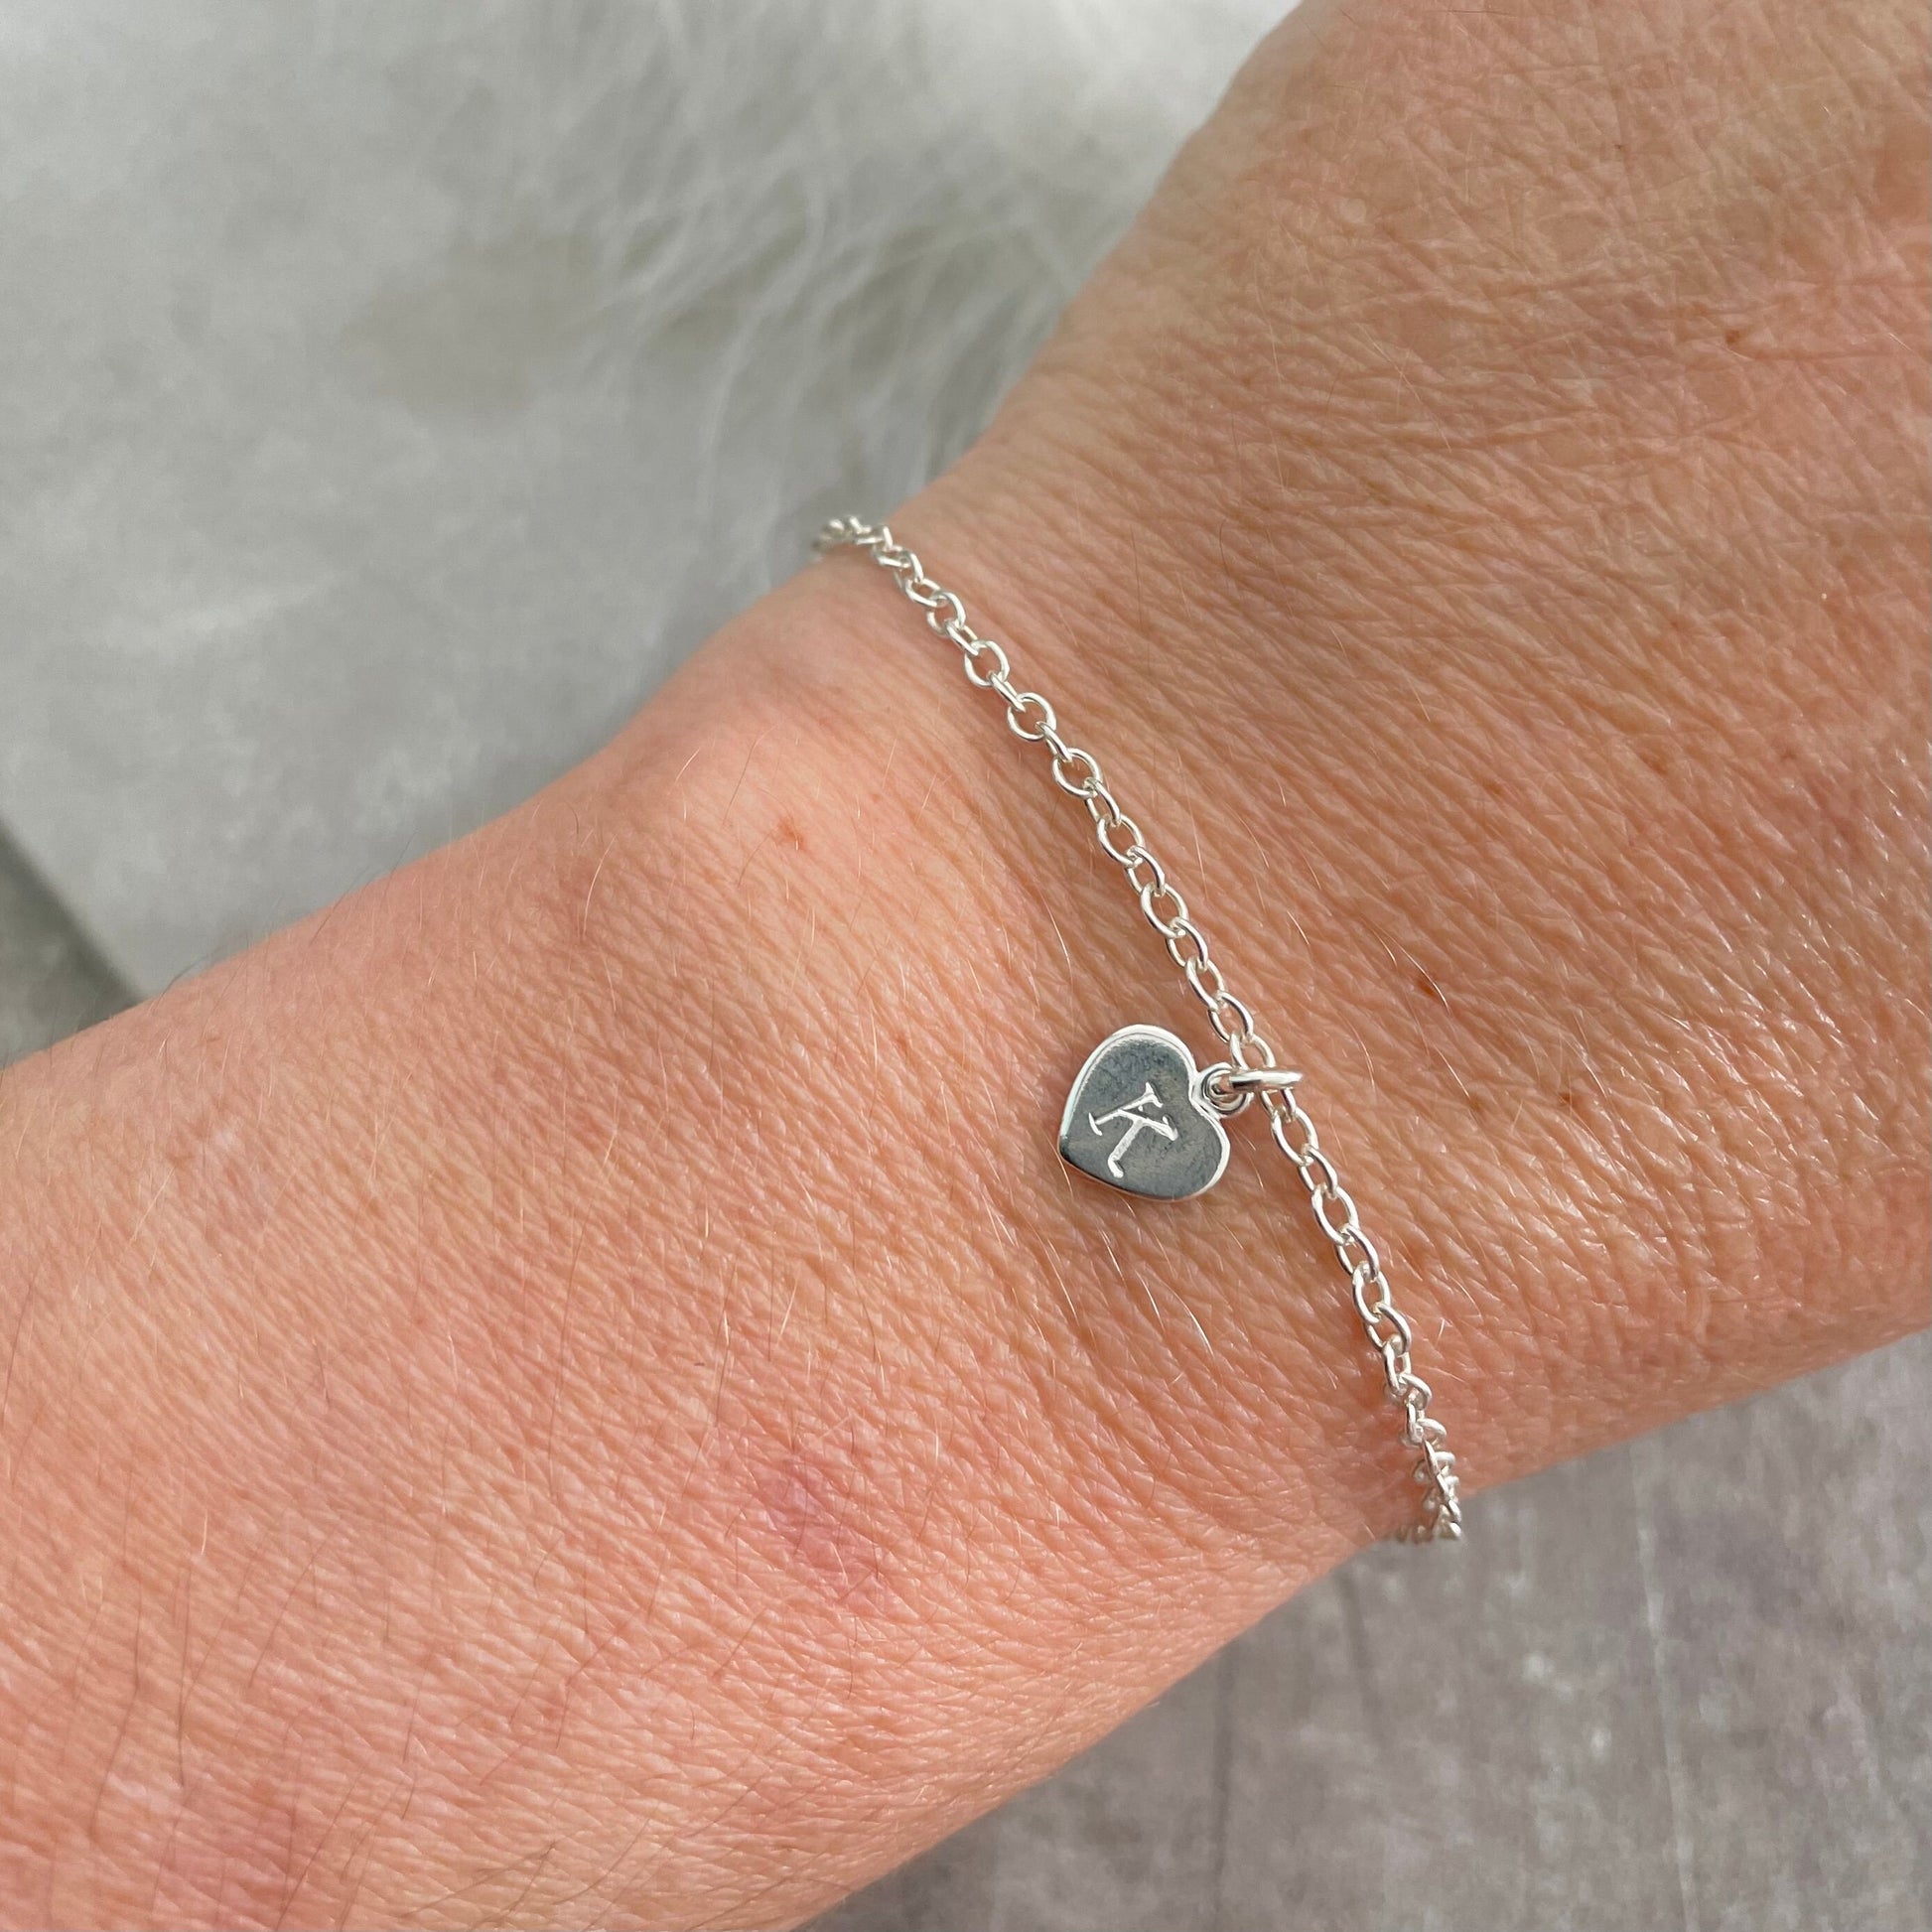 Personalised Initial Bracelet on Chain, Dainty Sterling Silver Jewellery